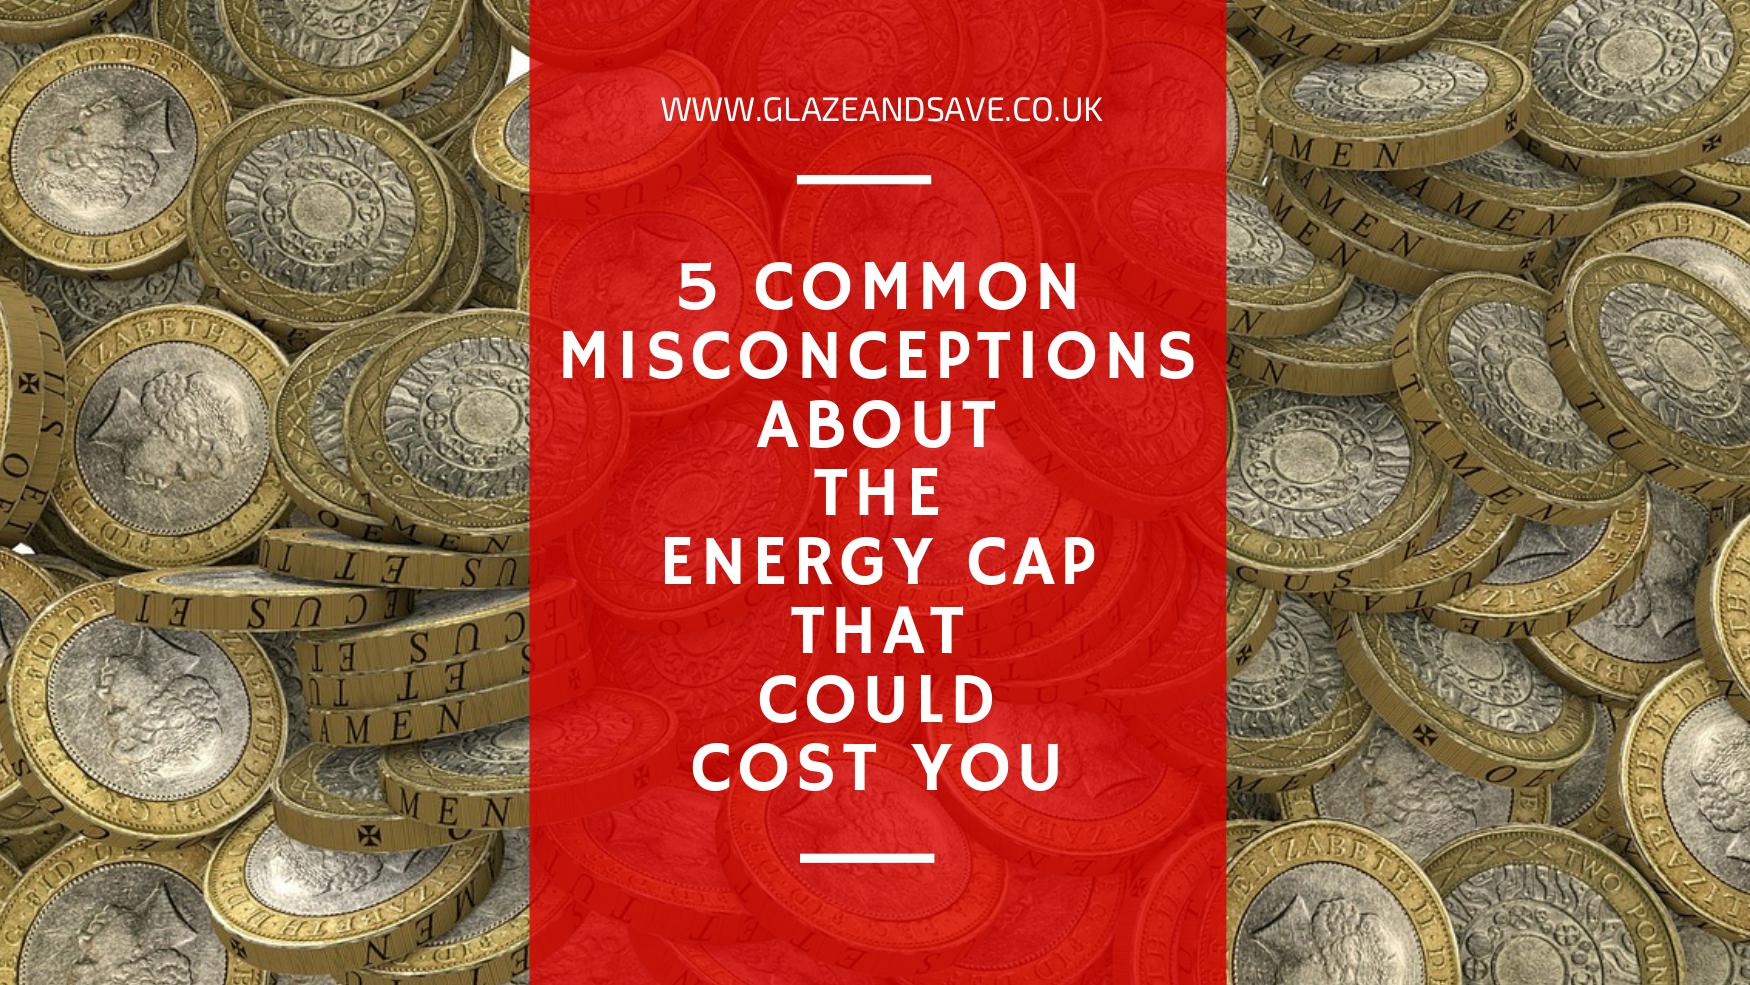 5 common misconceptions about the energy price cap that could cost you by Glaze & Save